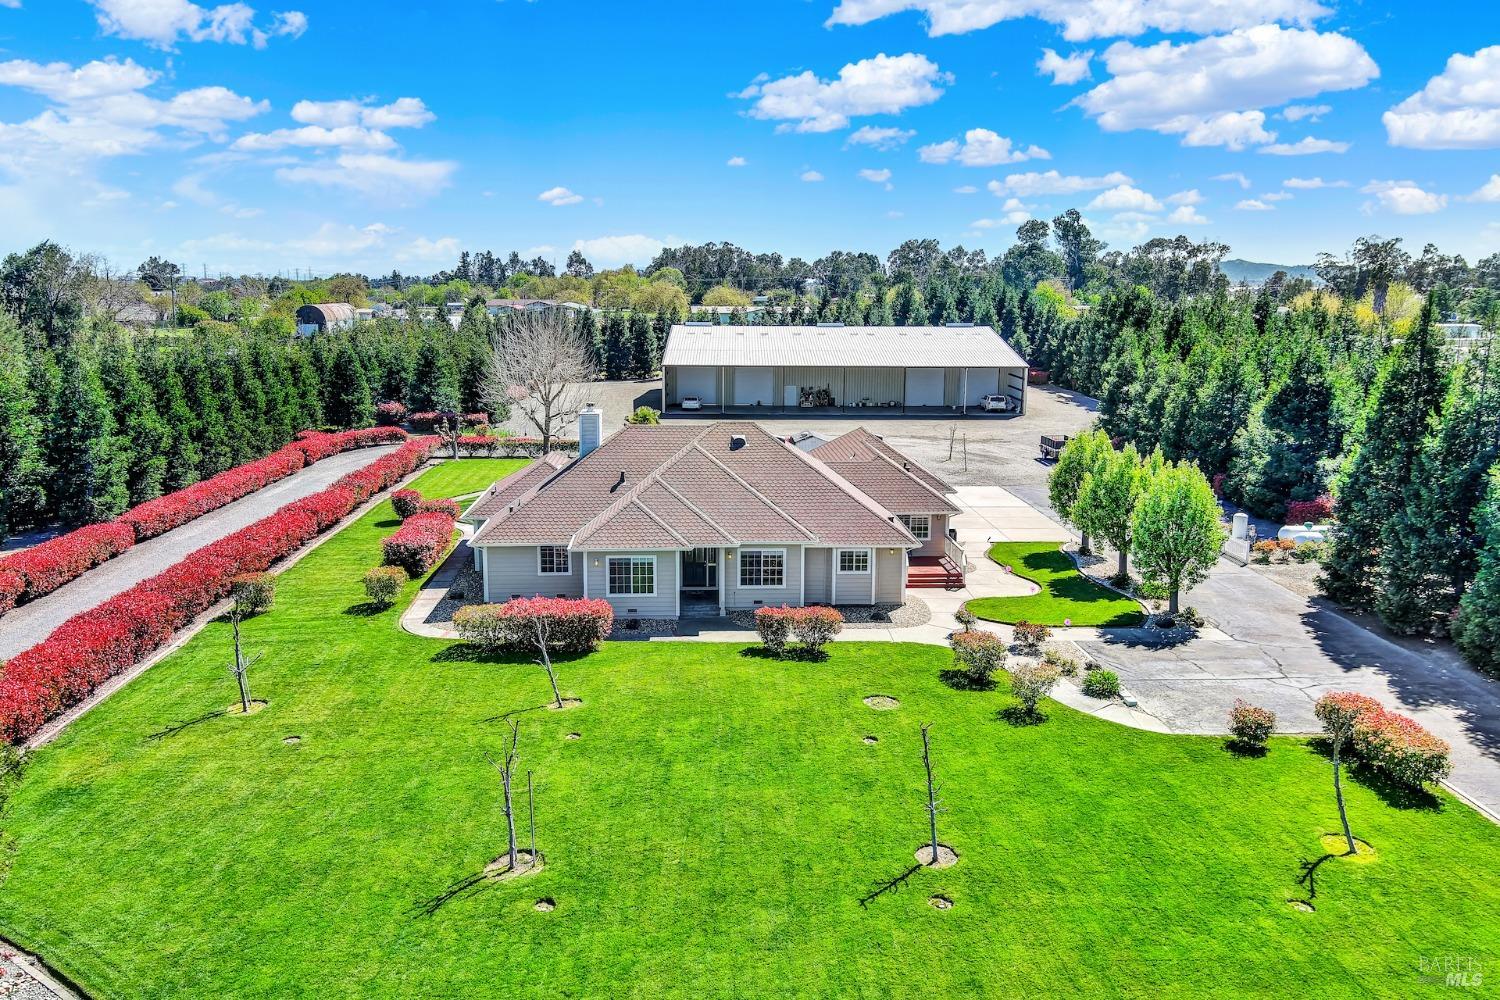 Photo of 5050 Melissa Ln in Vacaville, CA